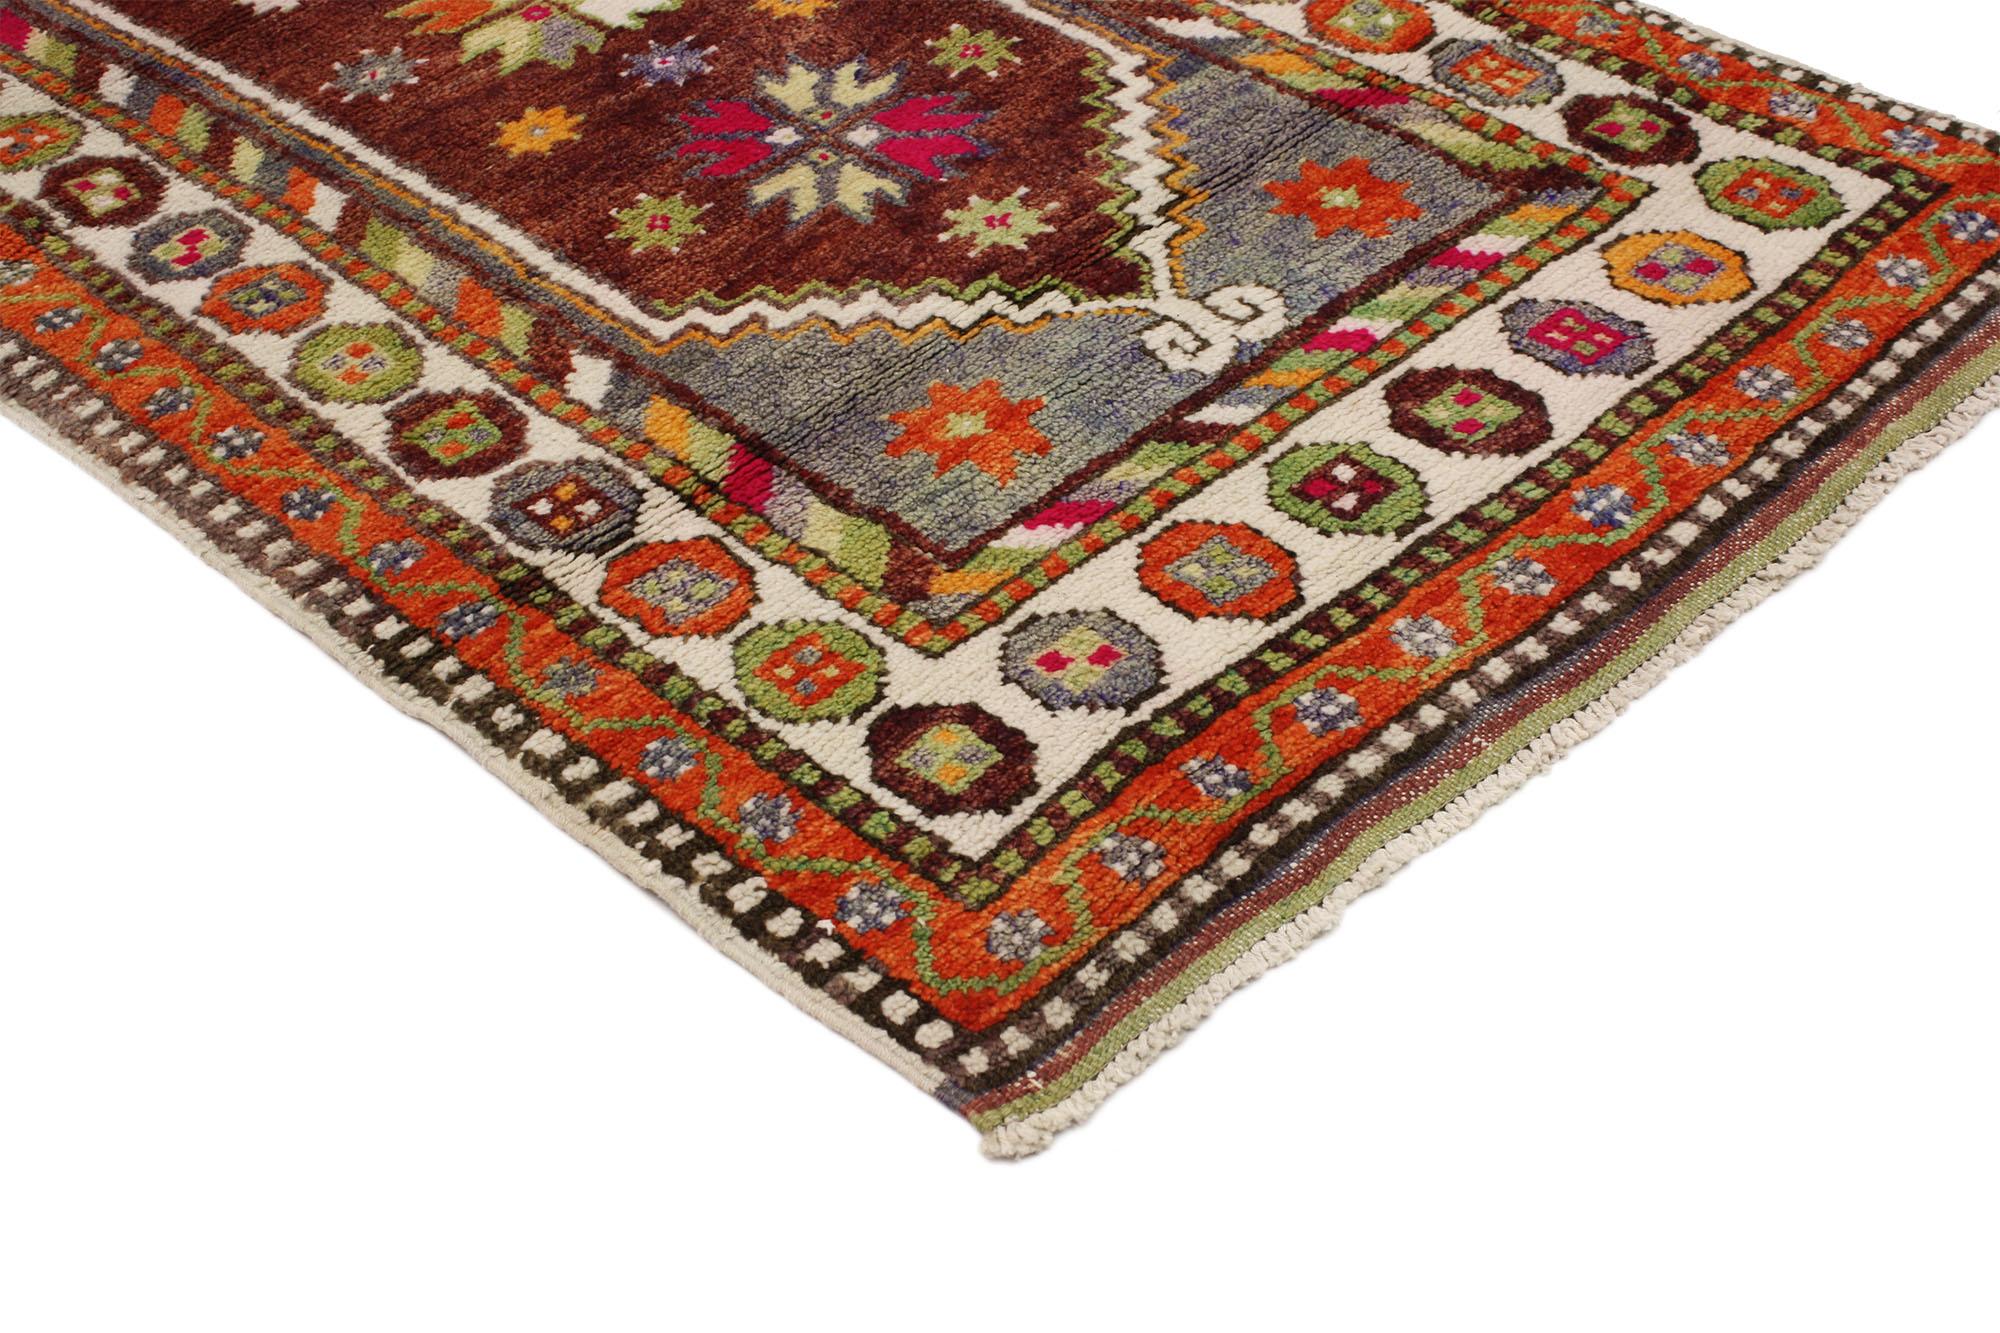 51768 Vintage Turkish Oushak Rug, 02'06 x 04'06.
Colorfully curated meets whimsical boho in this colorful Oushak rug. The eye-catching tribal design and lively colors woven into this piece work together creating a bold, exotic look. The composition